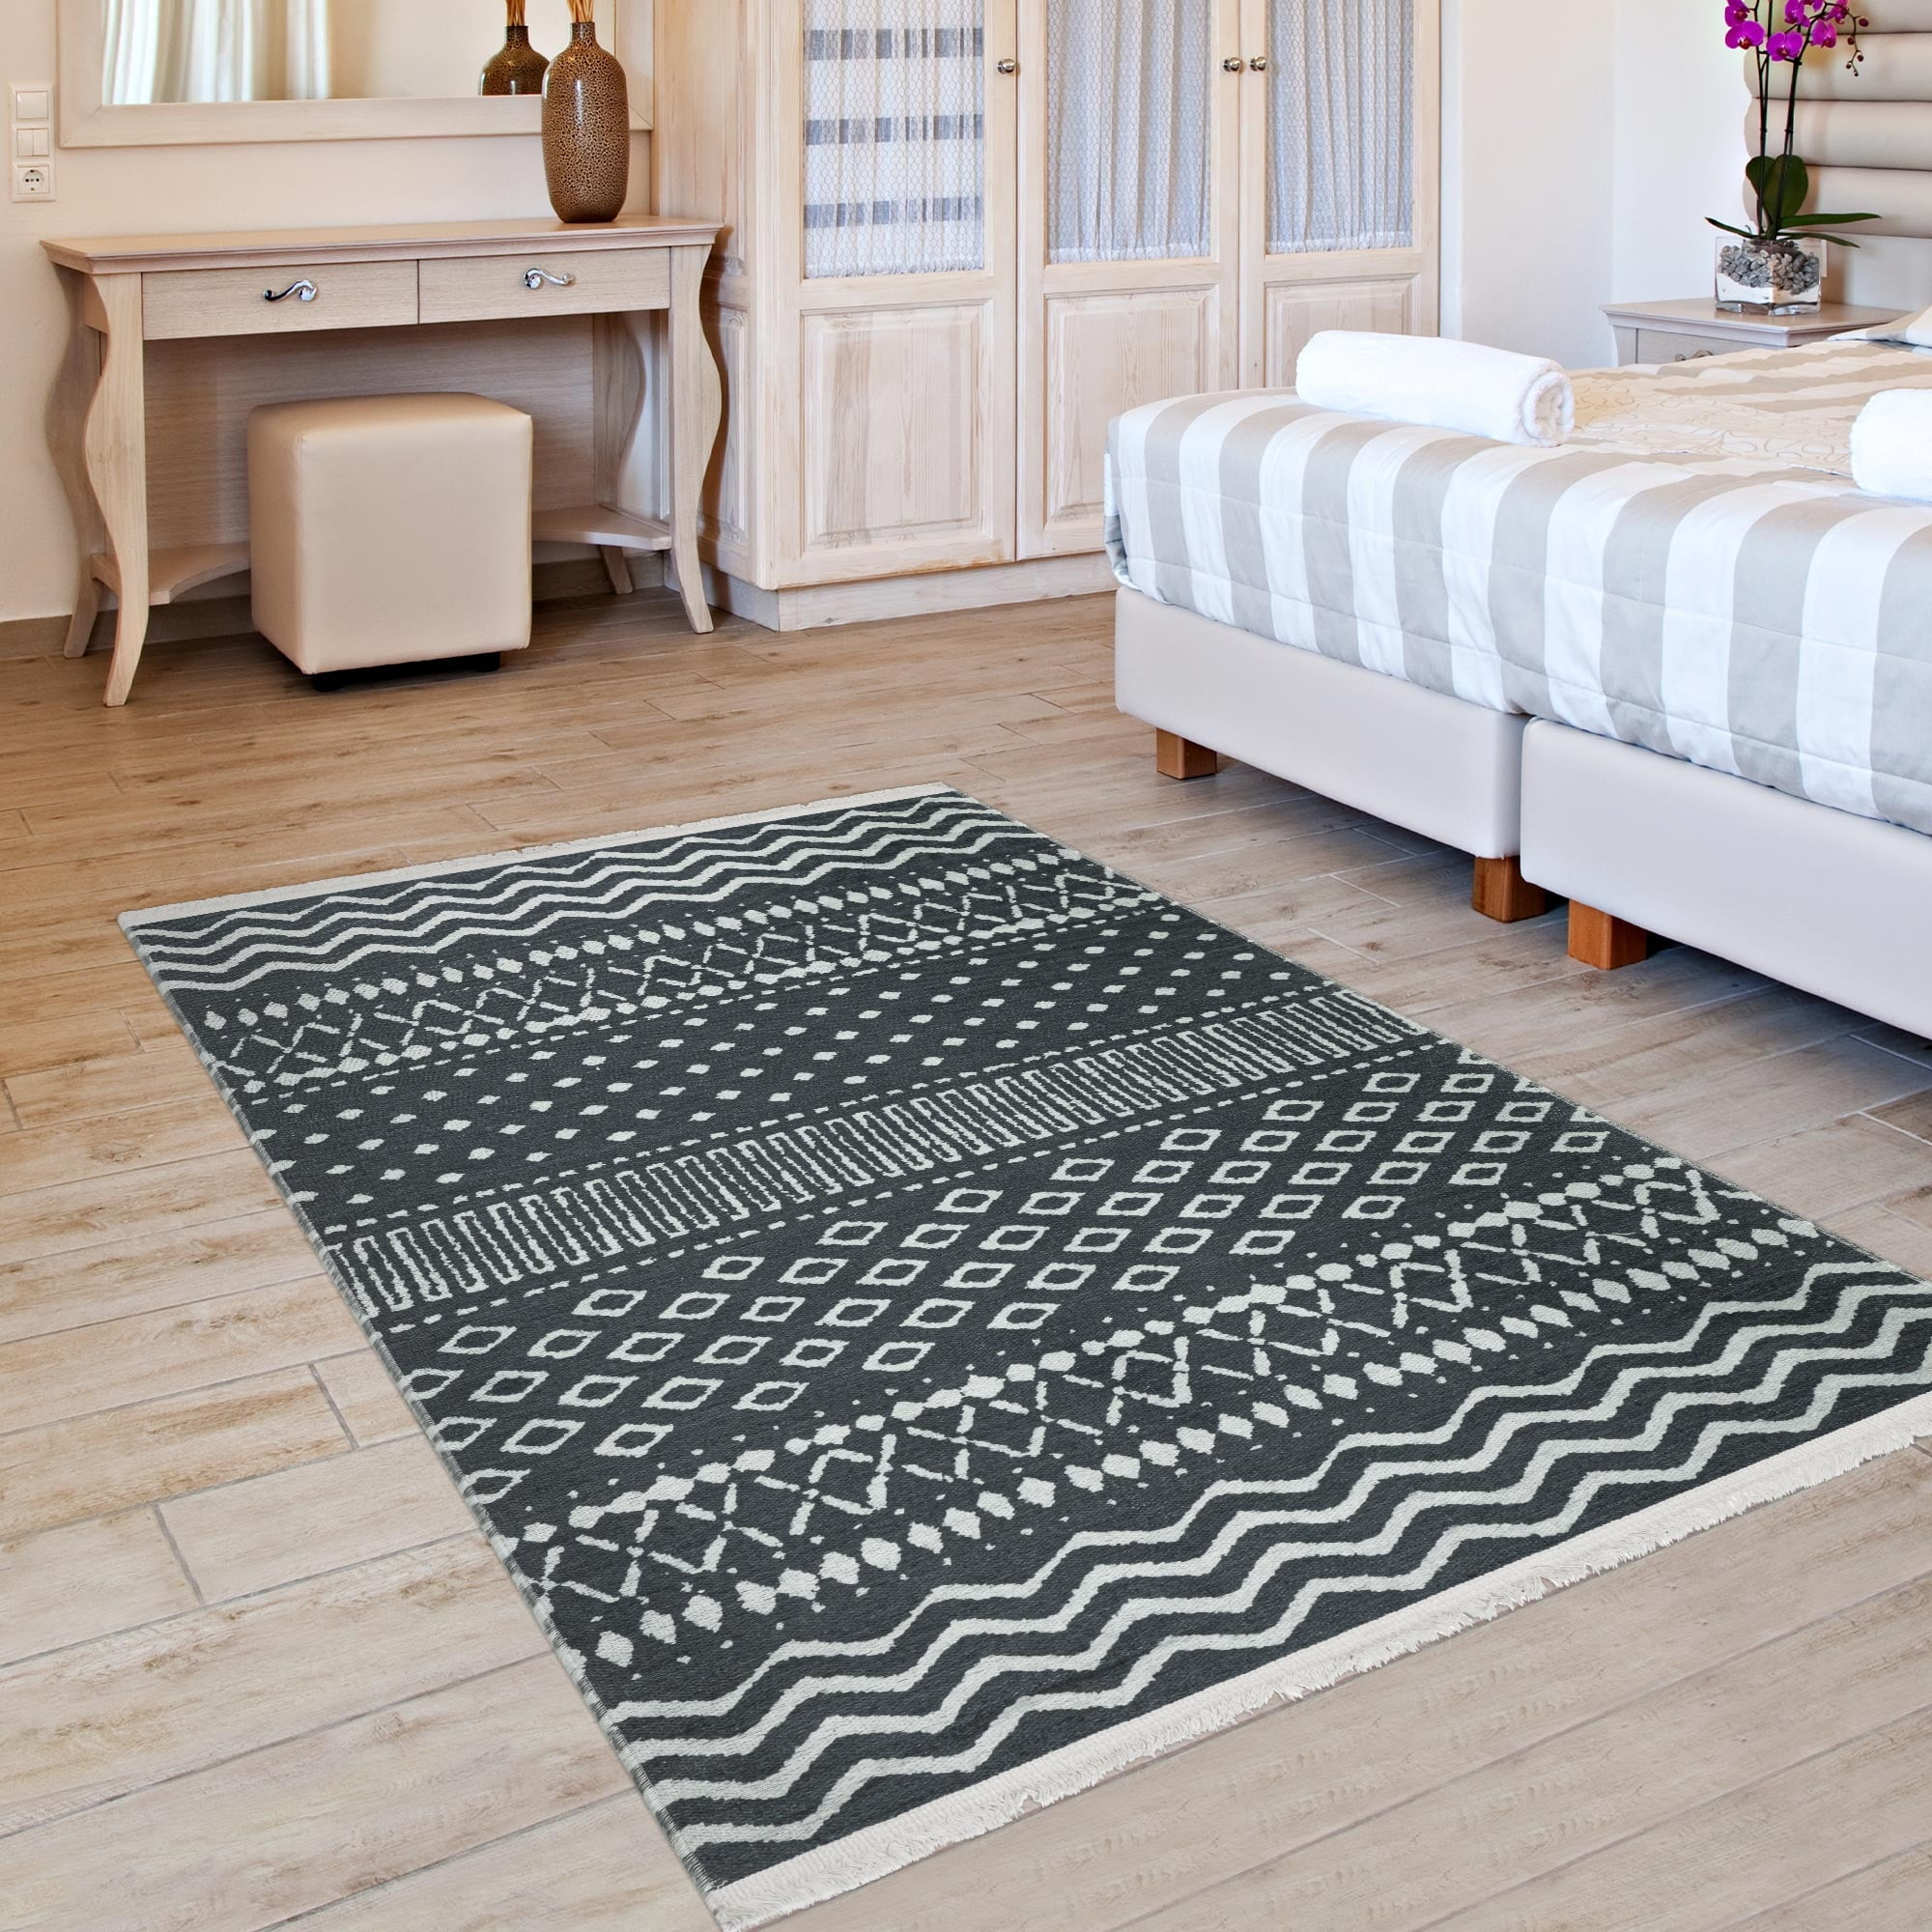 HAOCOO Boho Rug for Living Room 4' x 6', Moroccan Geometric Woven Cotton  Large Area Rug, Machine Washable Rug Indoor Outdoor Rug for Bedroom Dining  Room price in Saudi Arabia